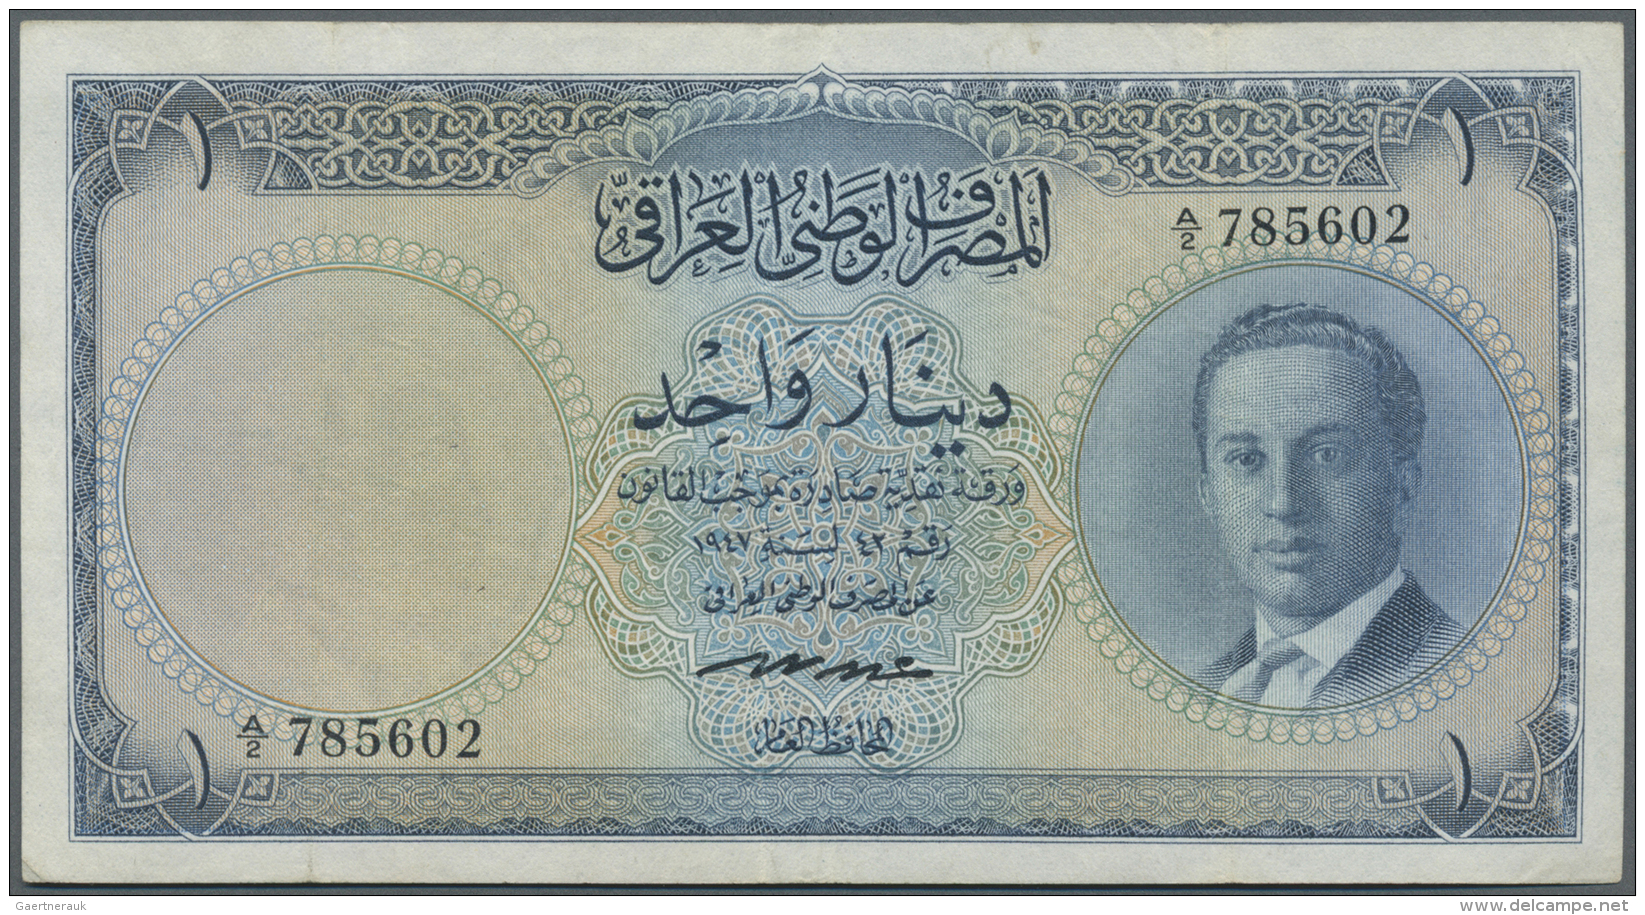 Iraq / Irak: 1 Dinar ND(1955) P. 39, Vertically Foled Several Times, No Holes Or Tears, Nice Colors, Crispness In Paper, - Iraq